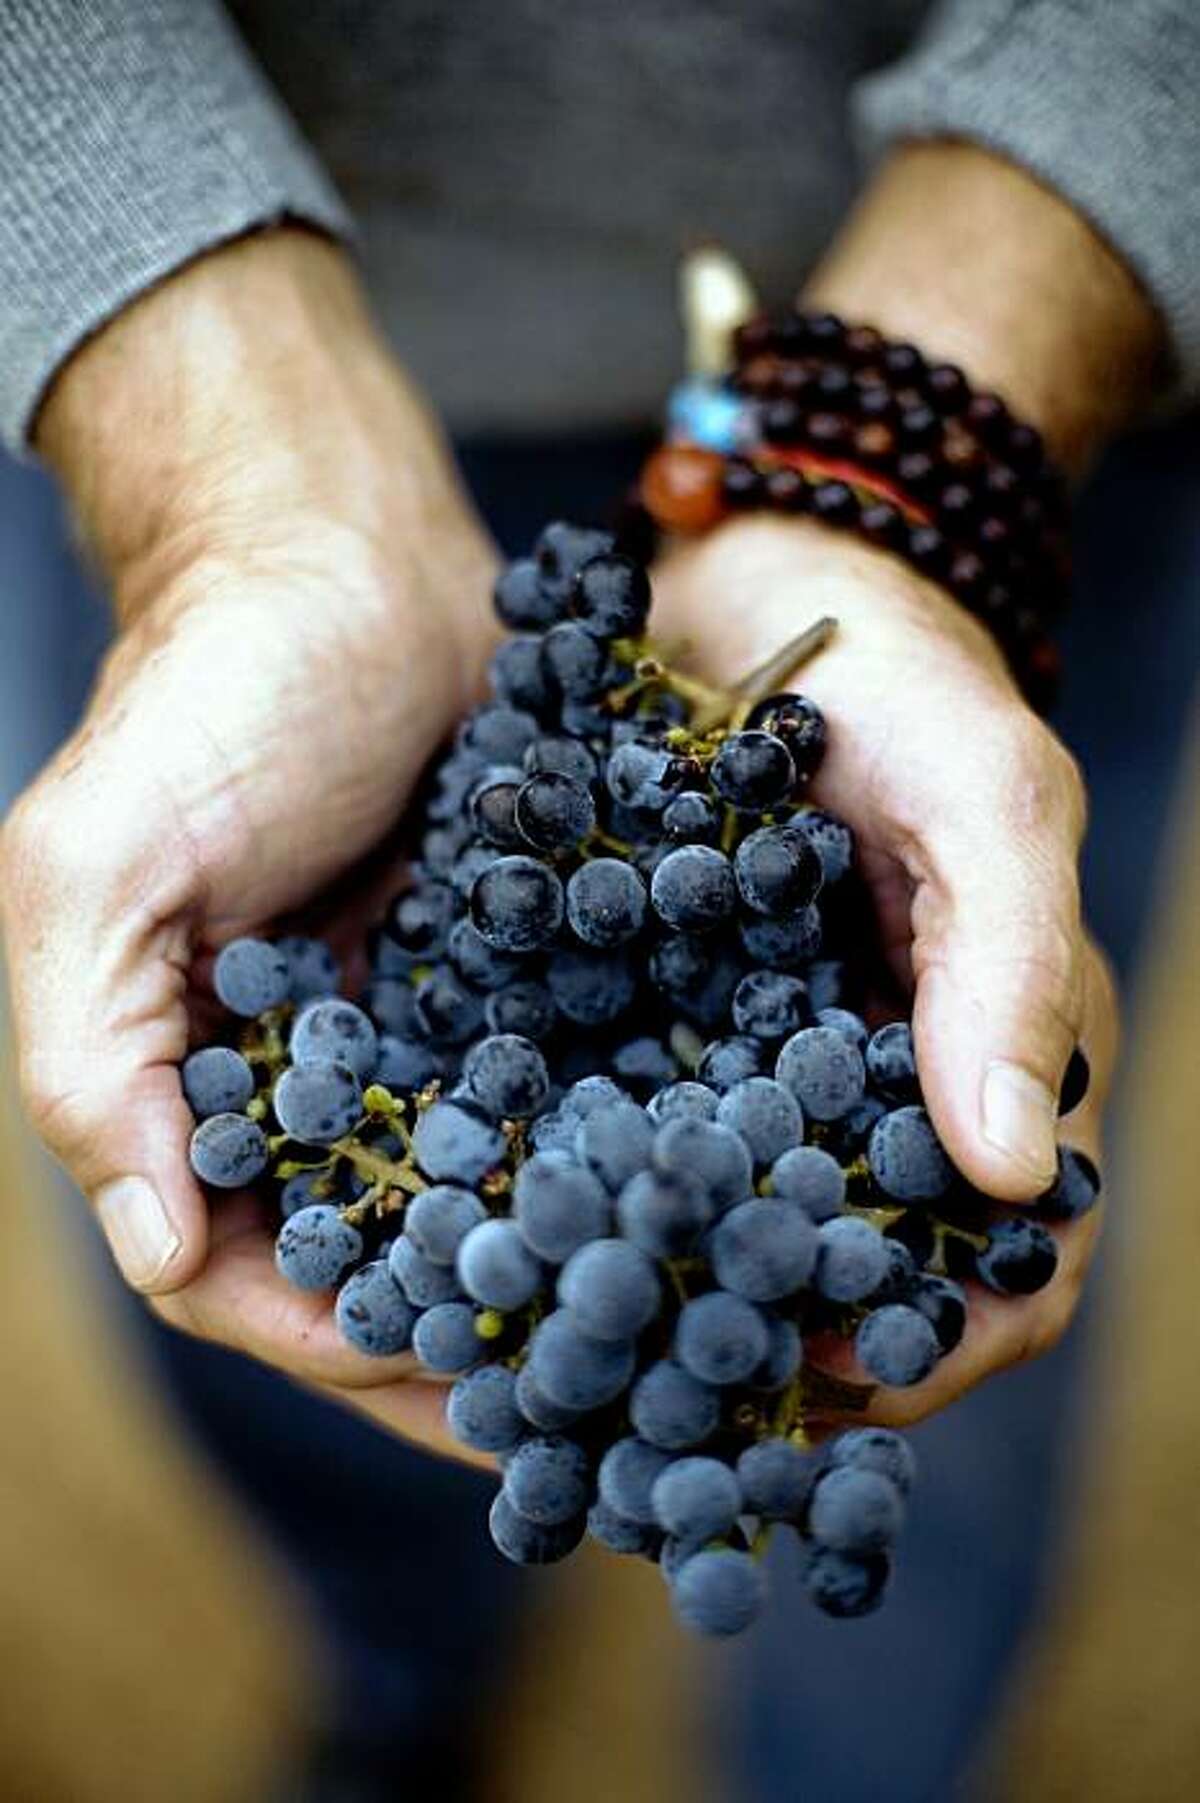 Vintner Dick Grace, of Grace Family Vineyards, in St. Helena, who created the first cult Cabernet, is a practicing buddhist who has been sober for 21 years, holds cabernet grapes, on Monday, August 31, 2009. Prayer beads wrap his right wrist.